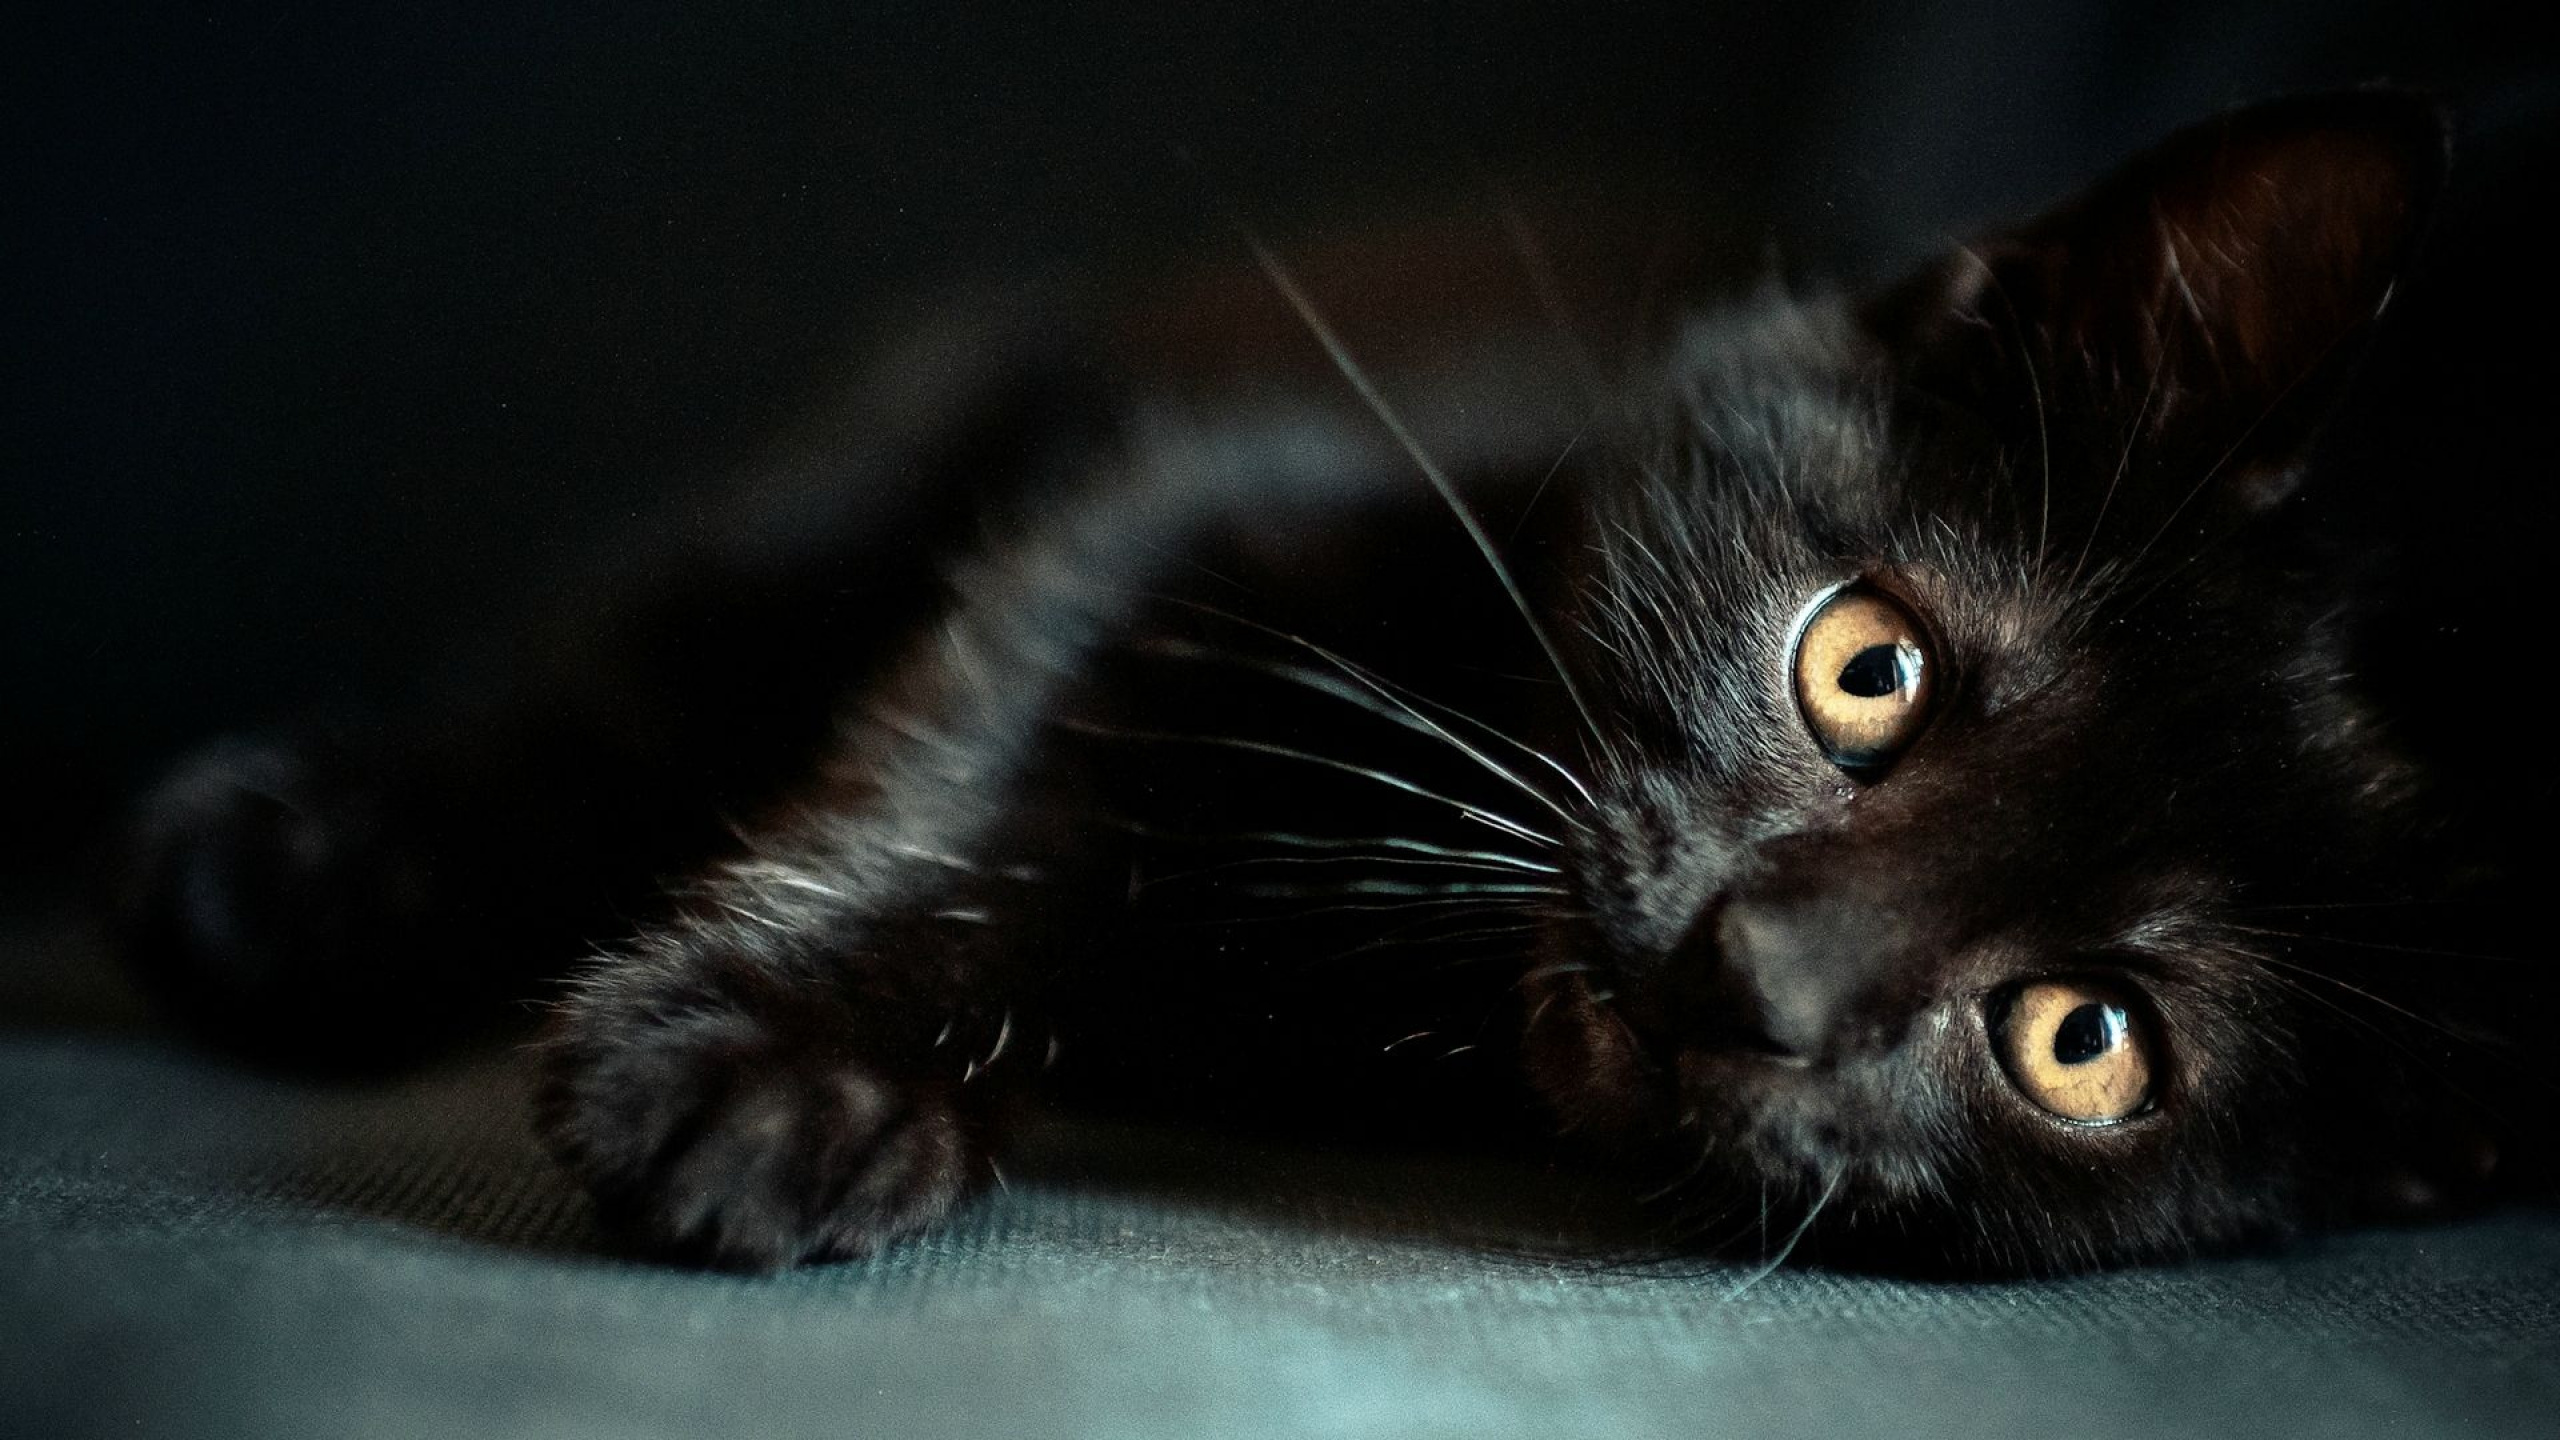 Black Cat Lying on Green Textile. Wallpaper in 2560x1440 Resolution